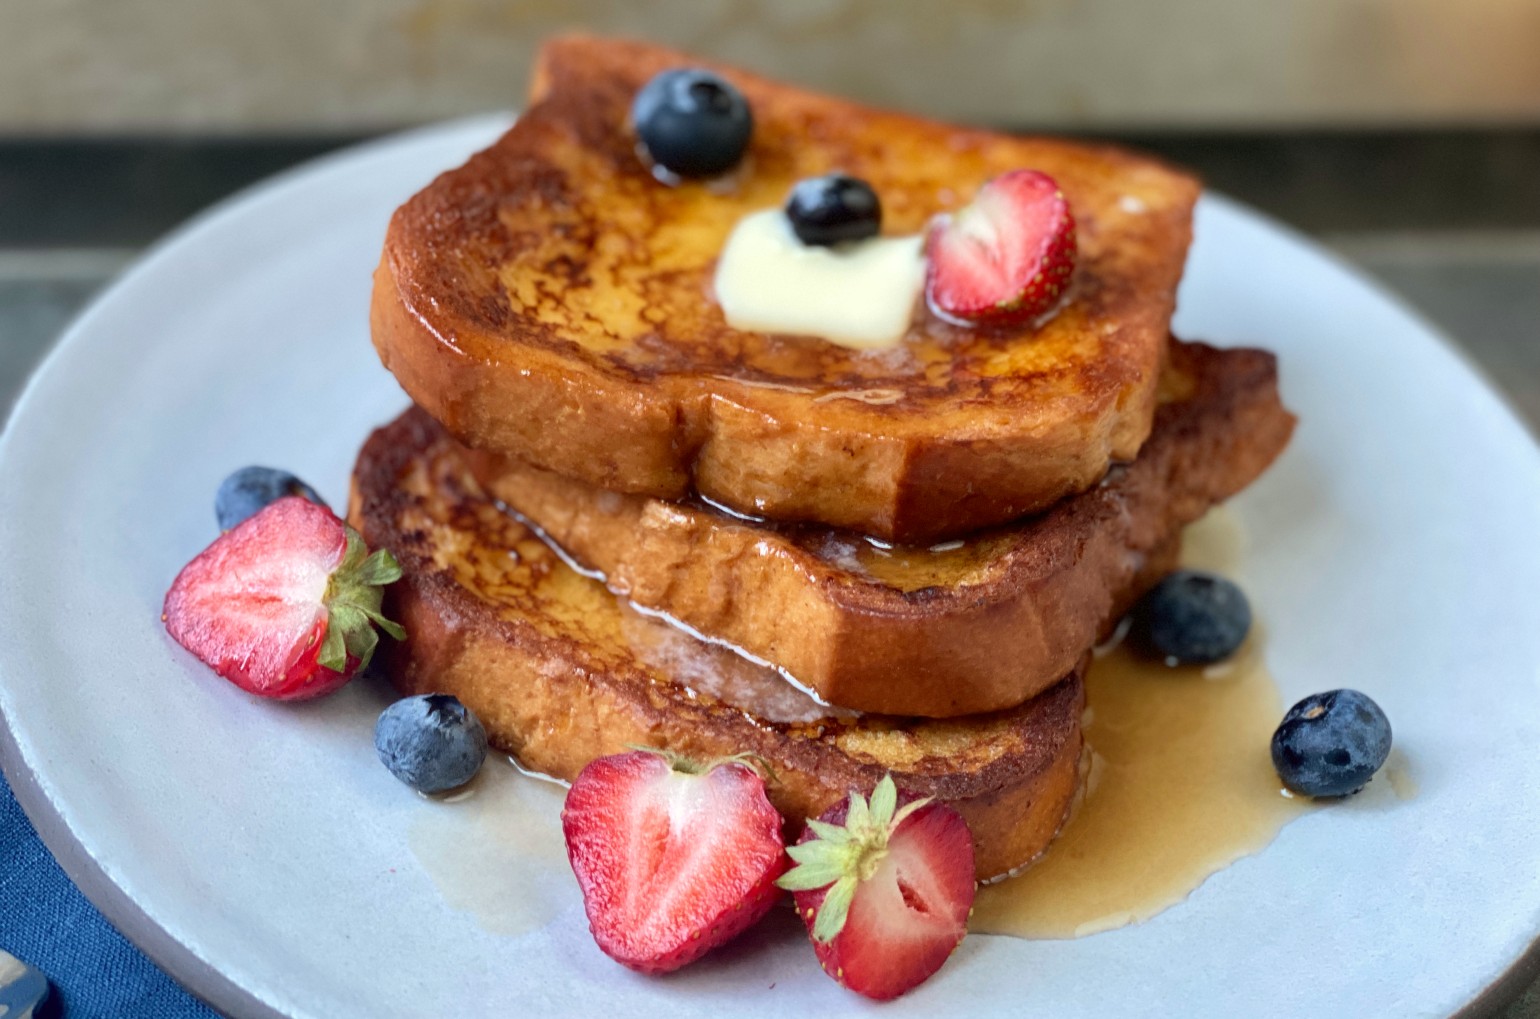 French toast tower topped in butter and syrup with scattered berries on a plate.